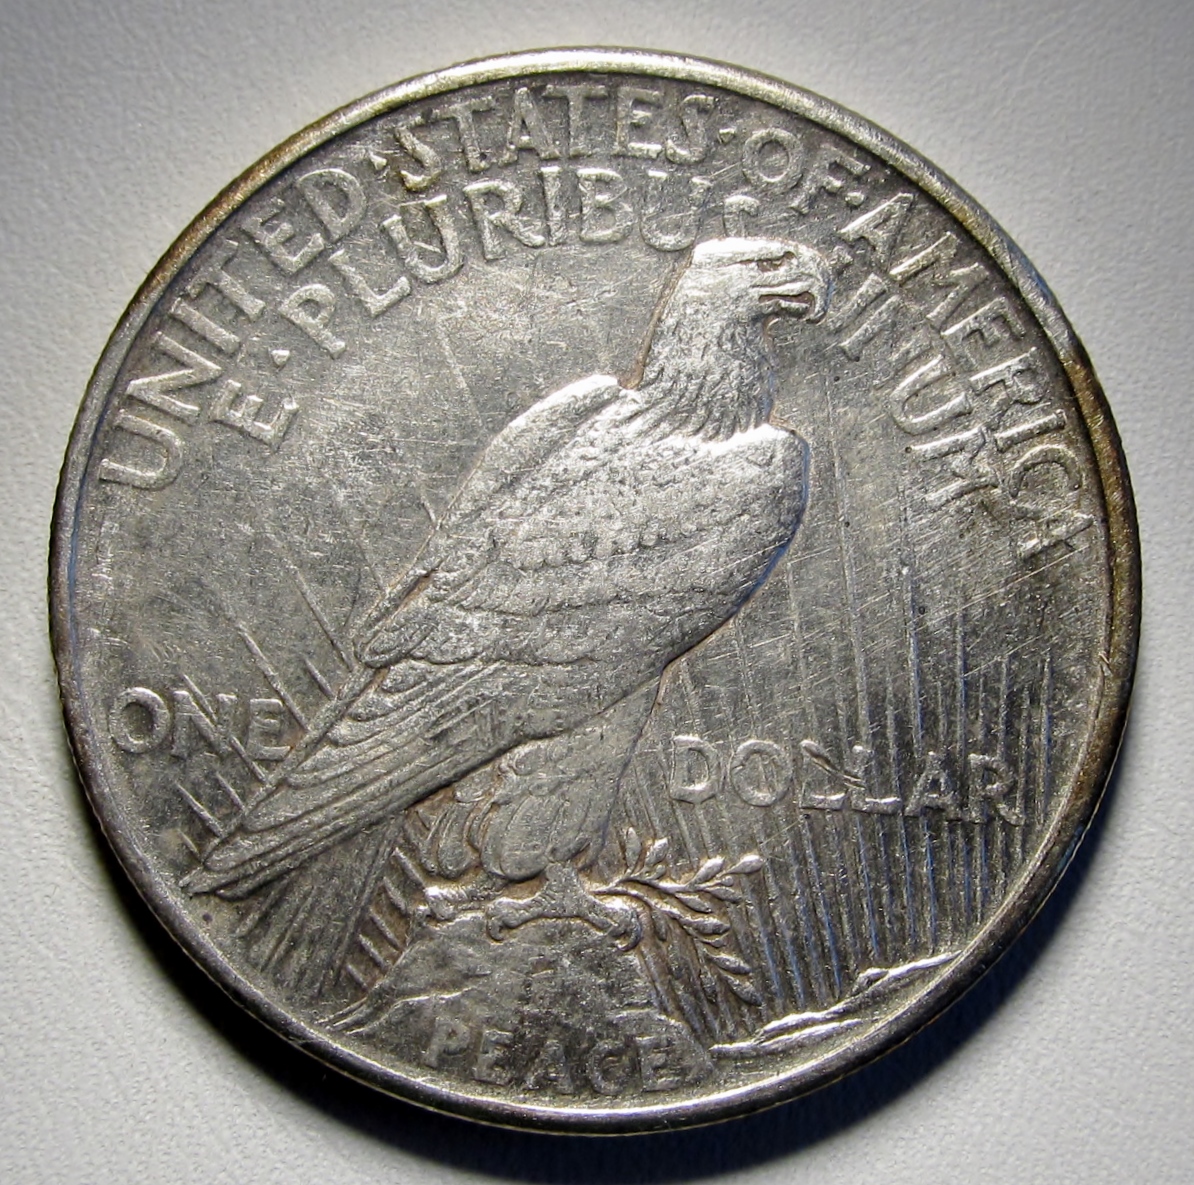 A Test Item for Silver Dollars - $1.00 : Decatur Coin and Jewelry ...